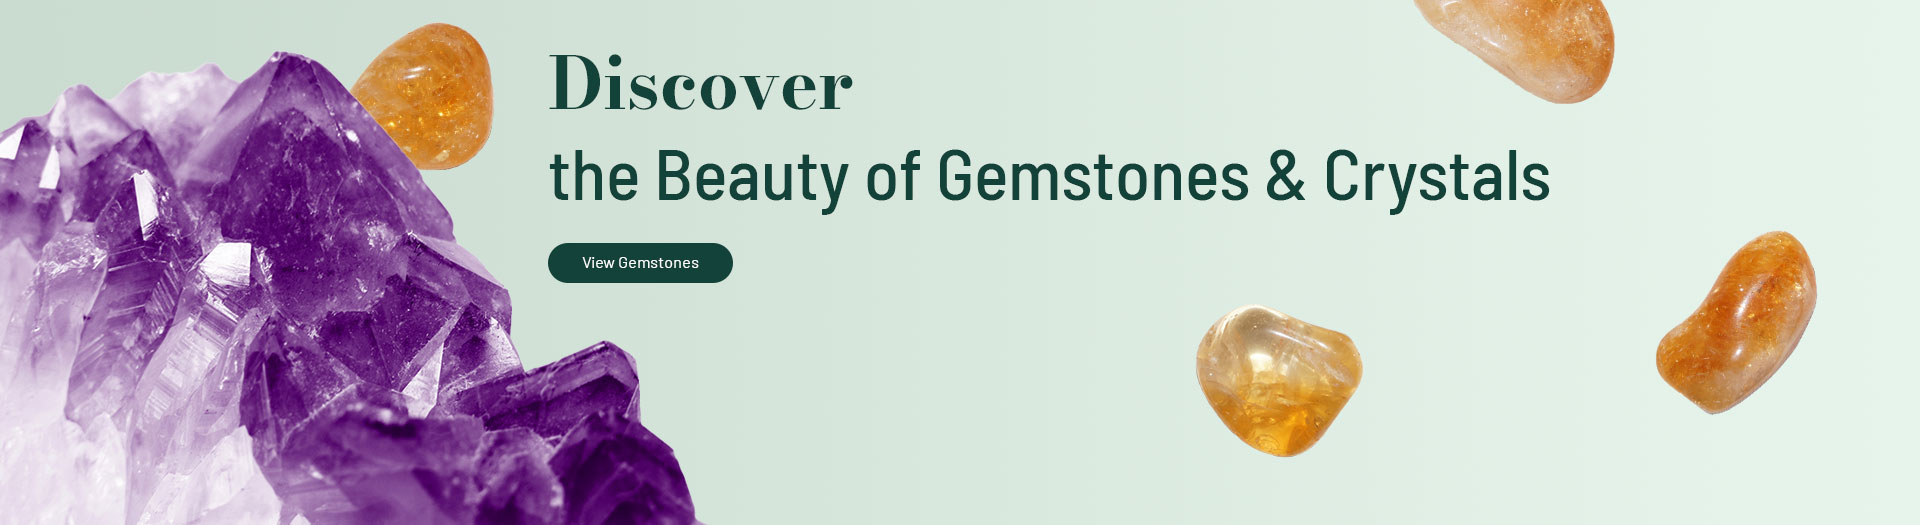 Discover the beauty of gemstones and crystals